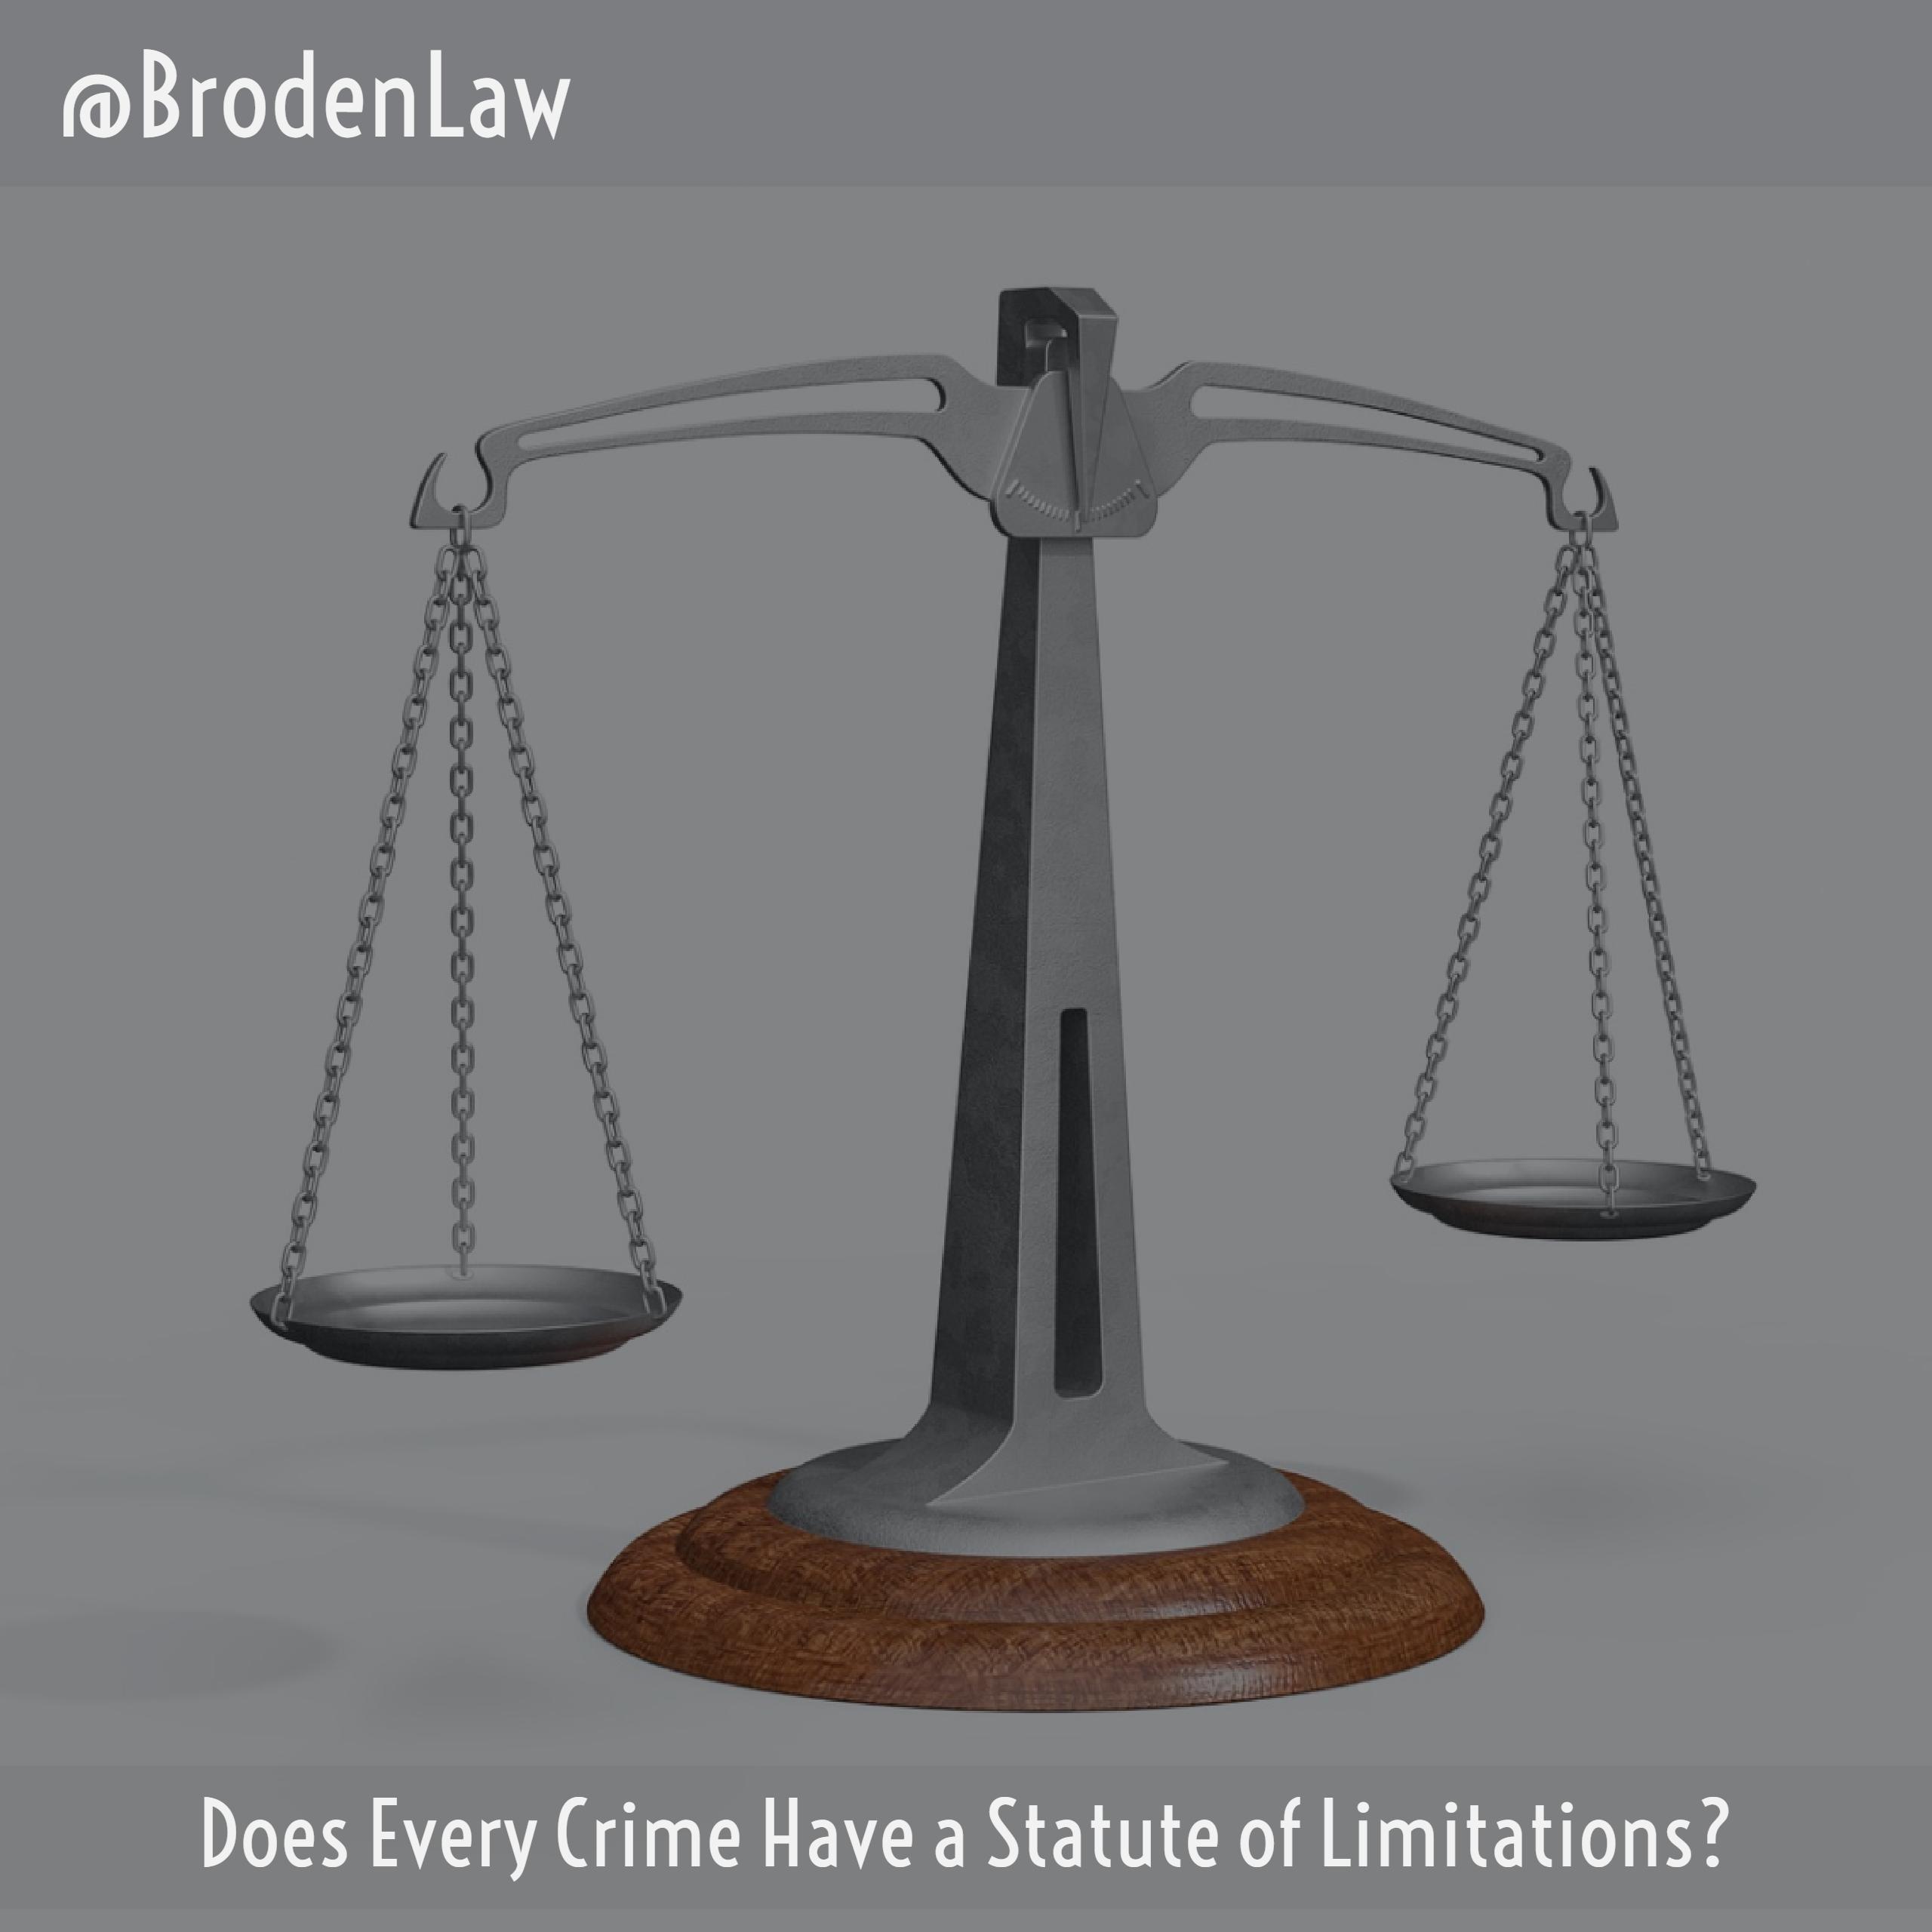 Does Every Crime Have a Statute of Limitations